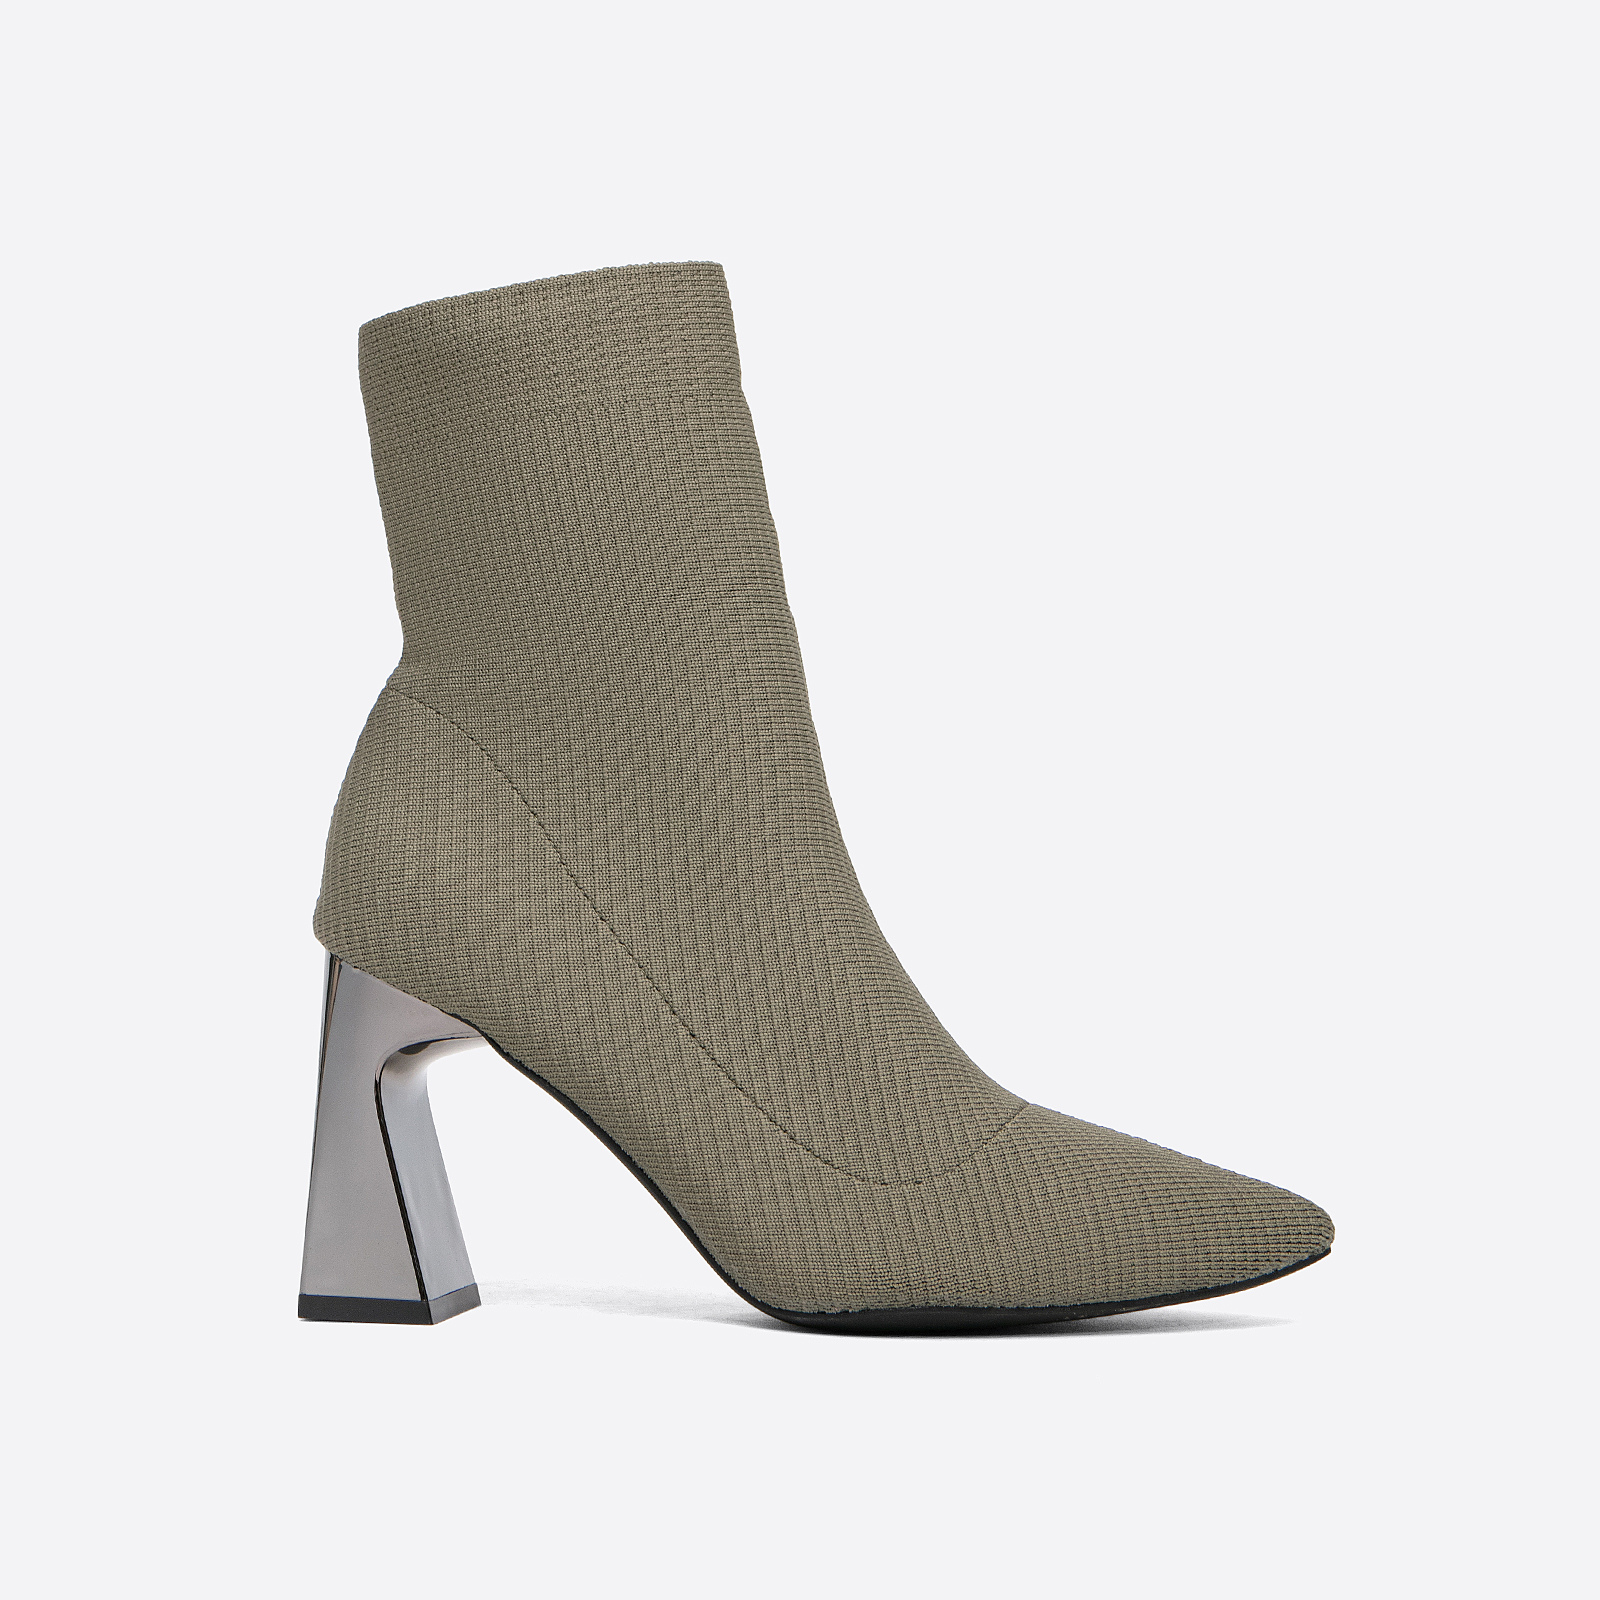 MOUSSE FIT Women Work Minimalist Ankle Boots